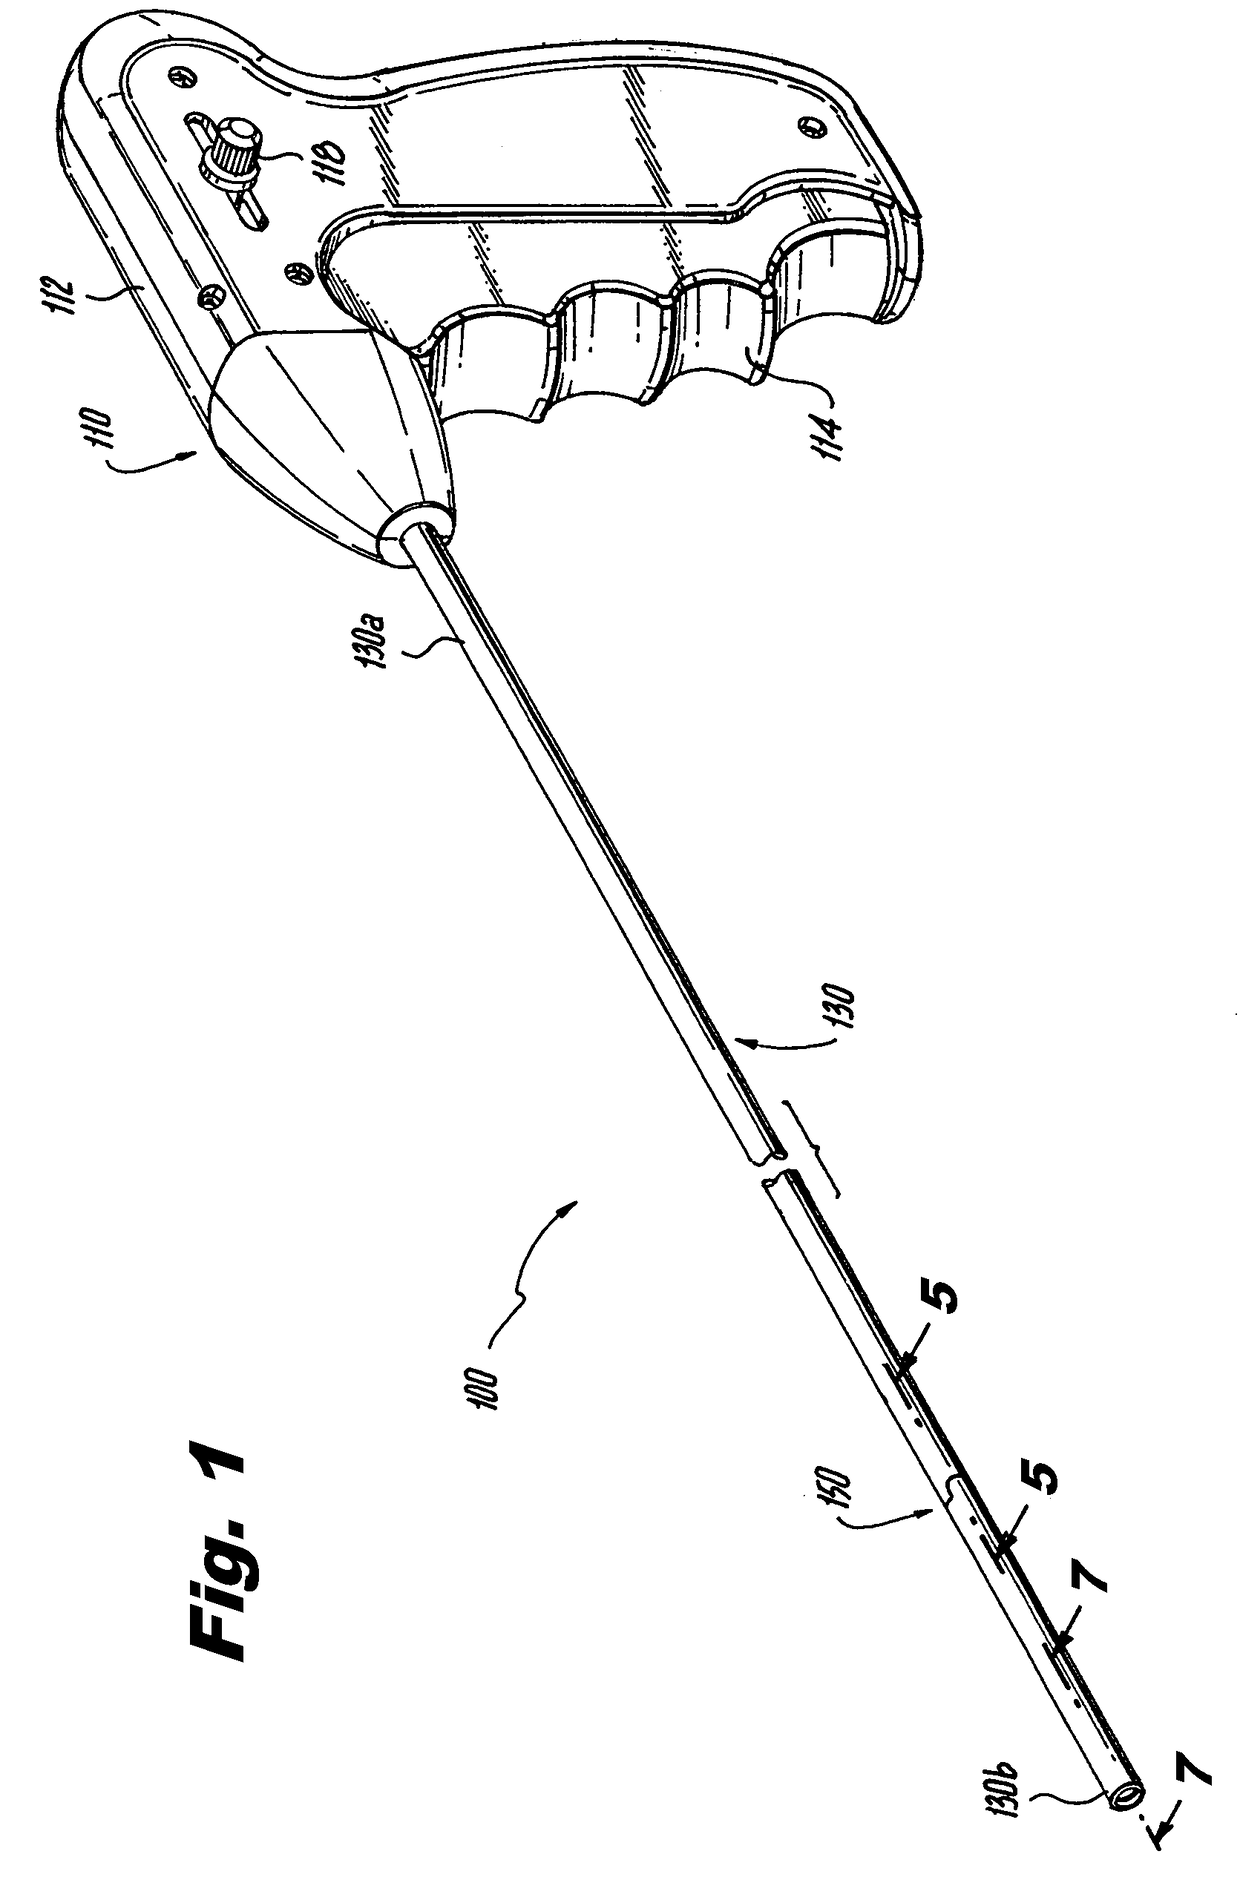 Articulation joint for apparatus for endoscopic procedures